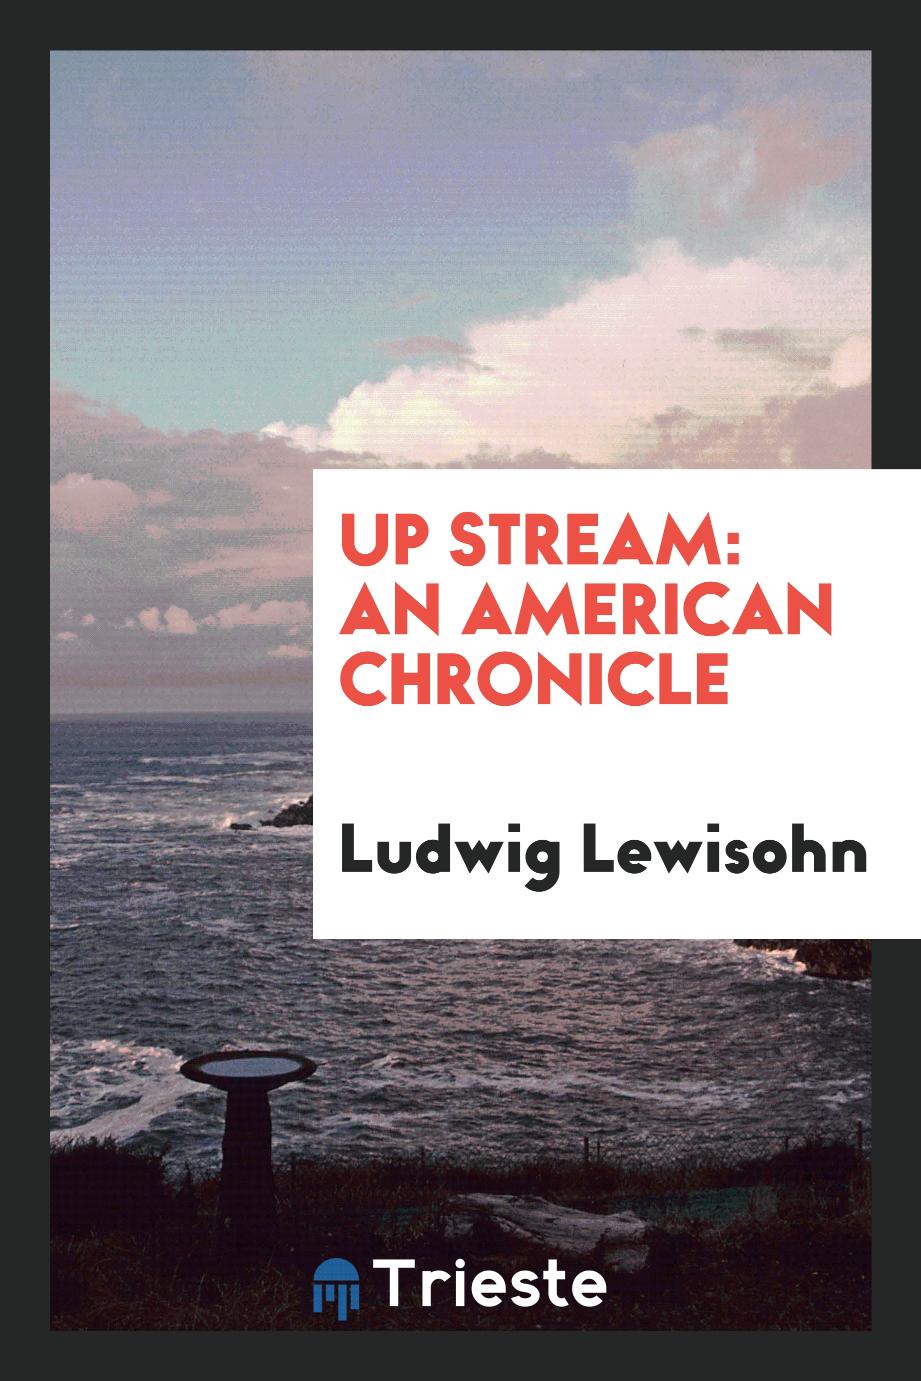 Up stream: an American chronicle